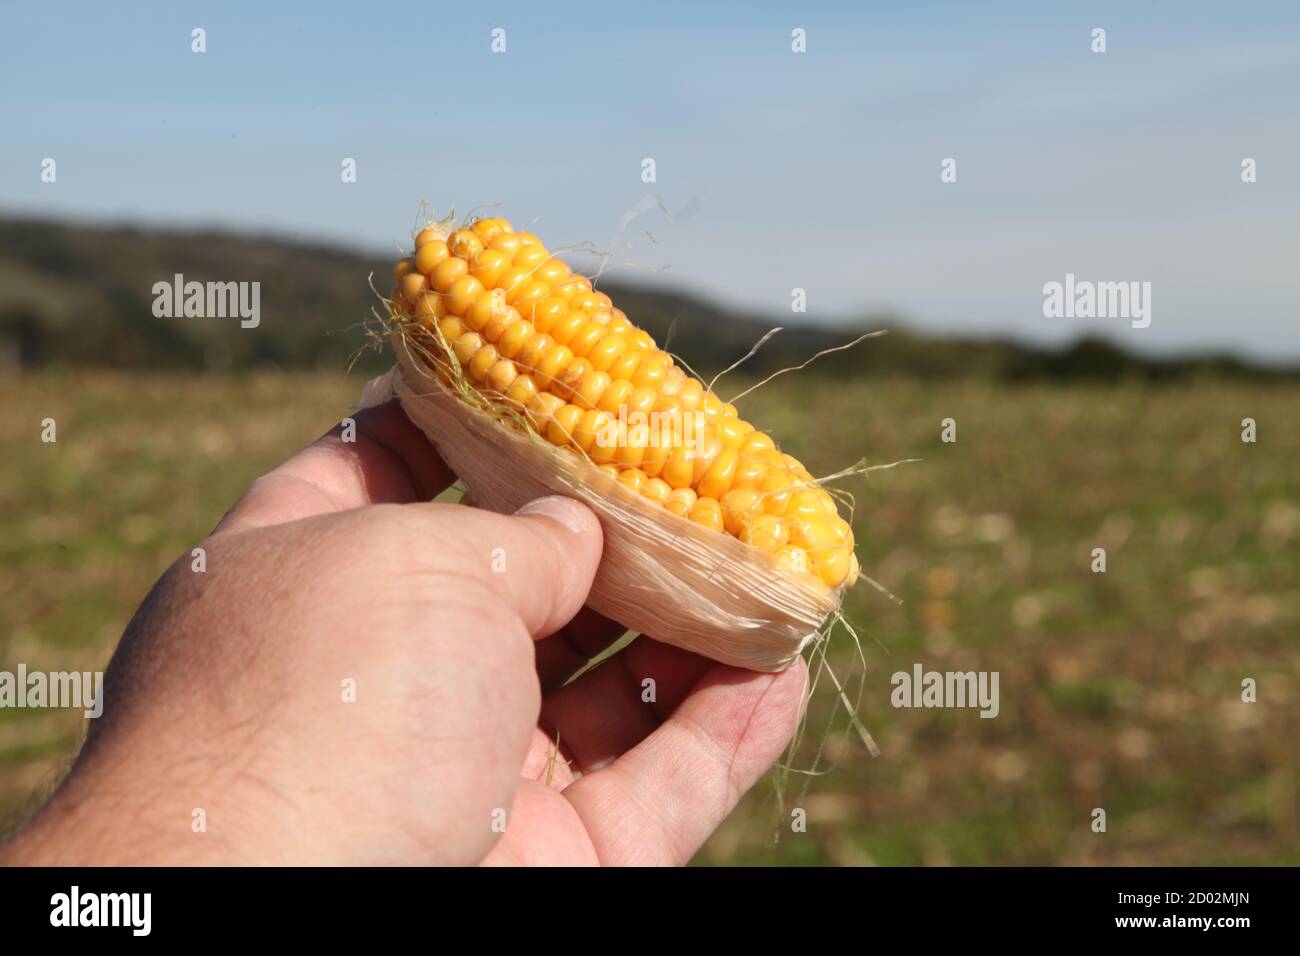 Sweetcorn on the cob held up in hand against field, outdoor cobs left on field floor after harvest crops cut down, Surrey, UK, September 2020 Stock Photo